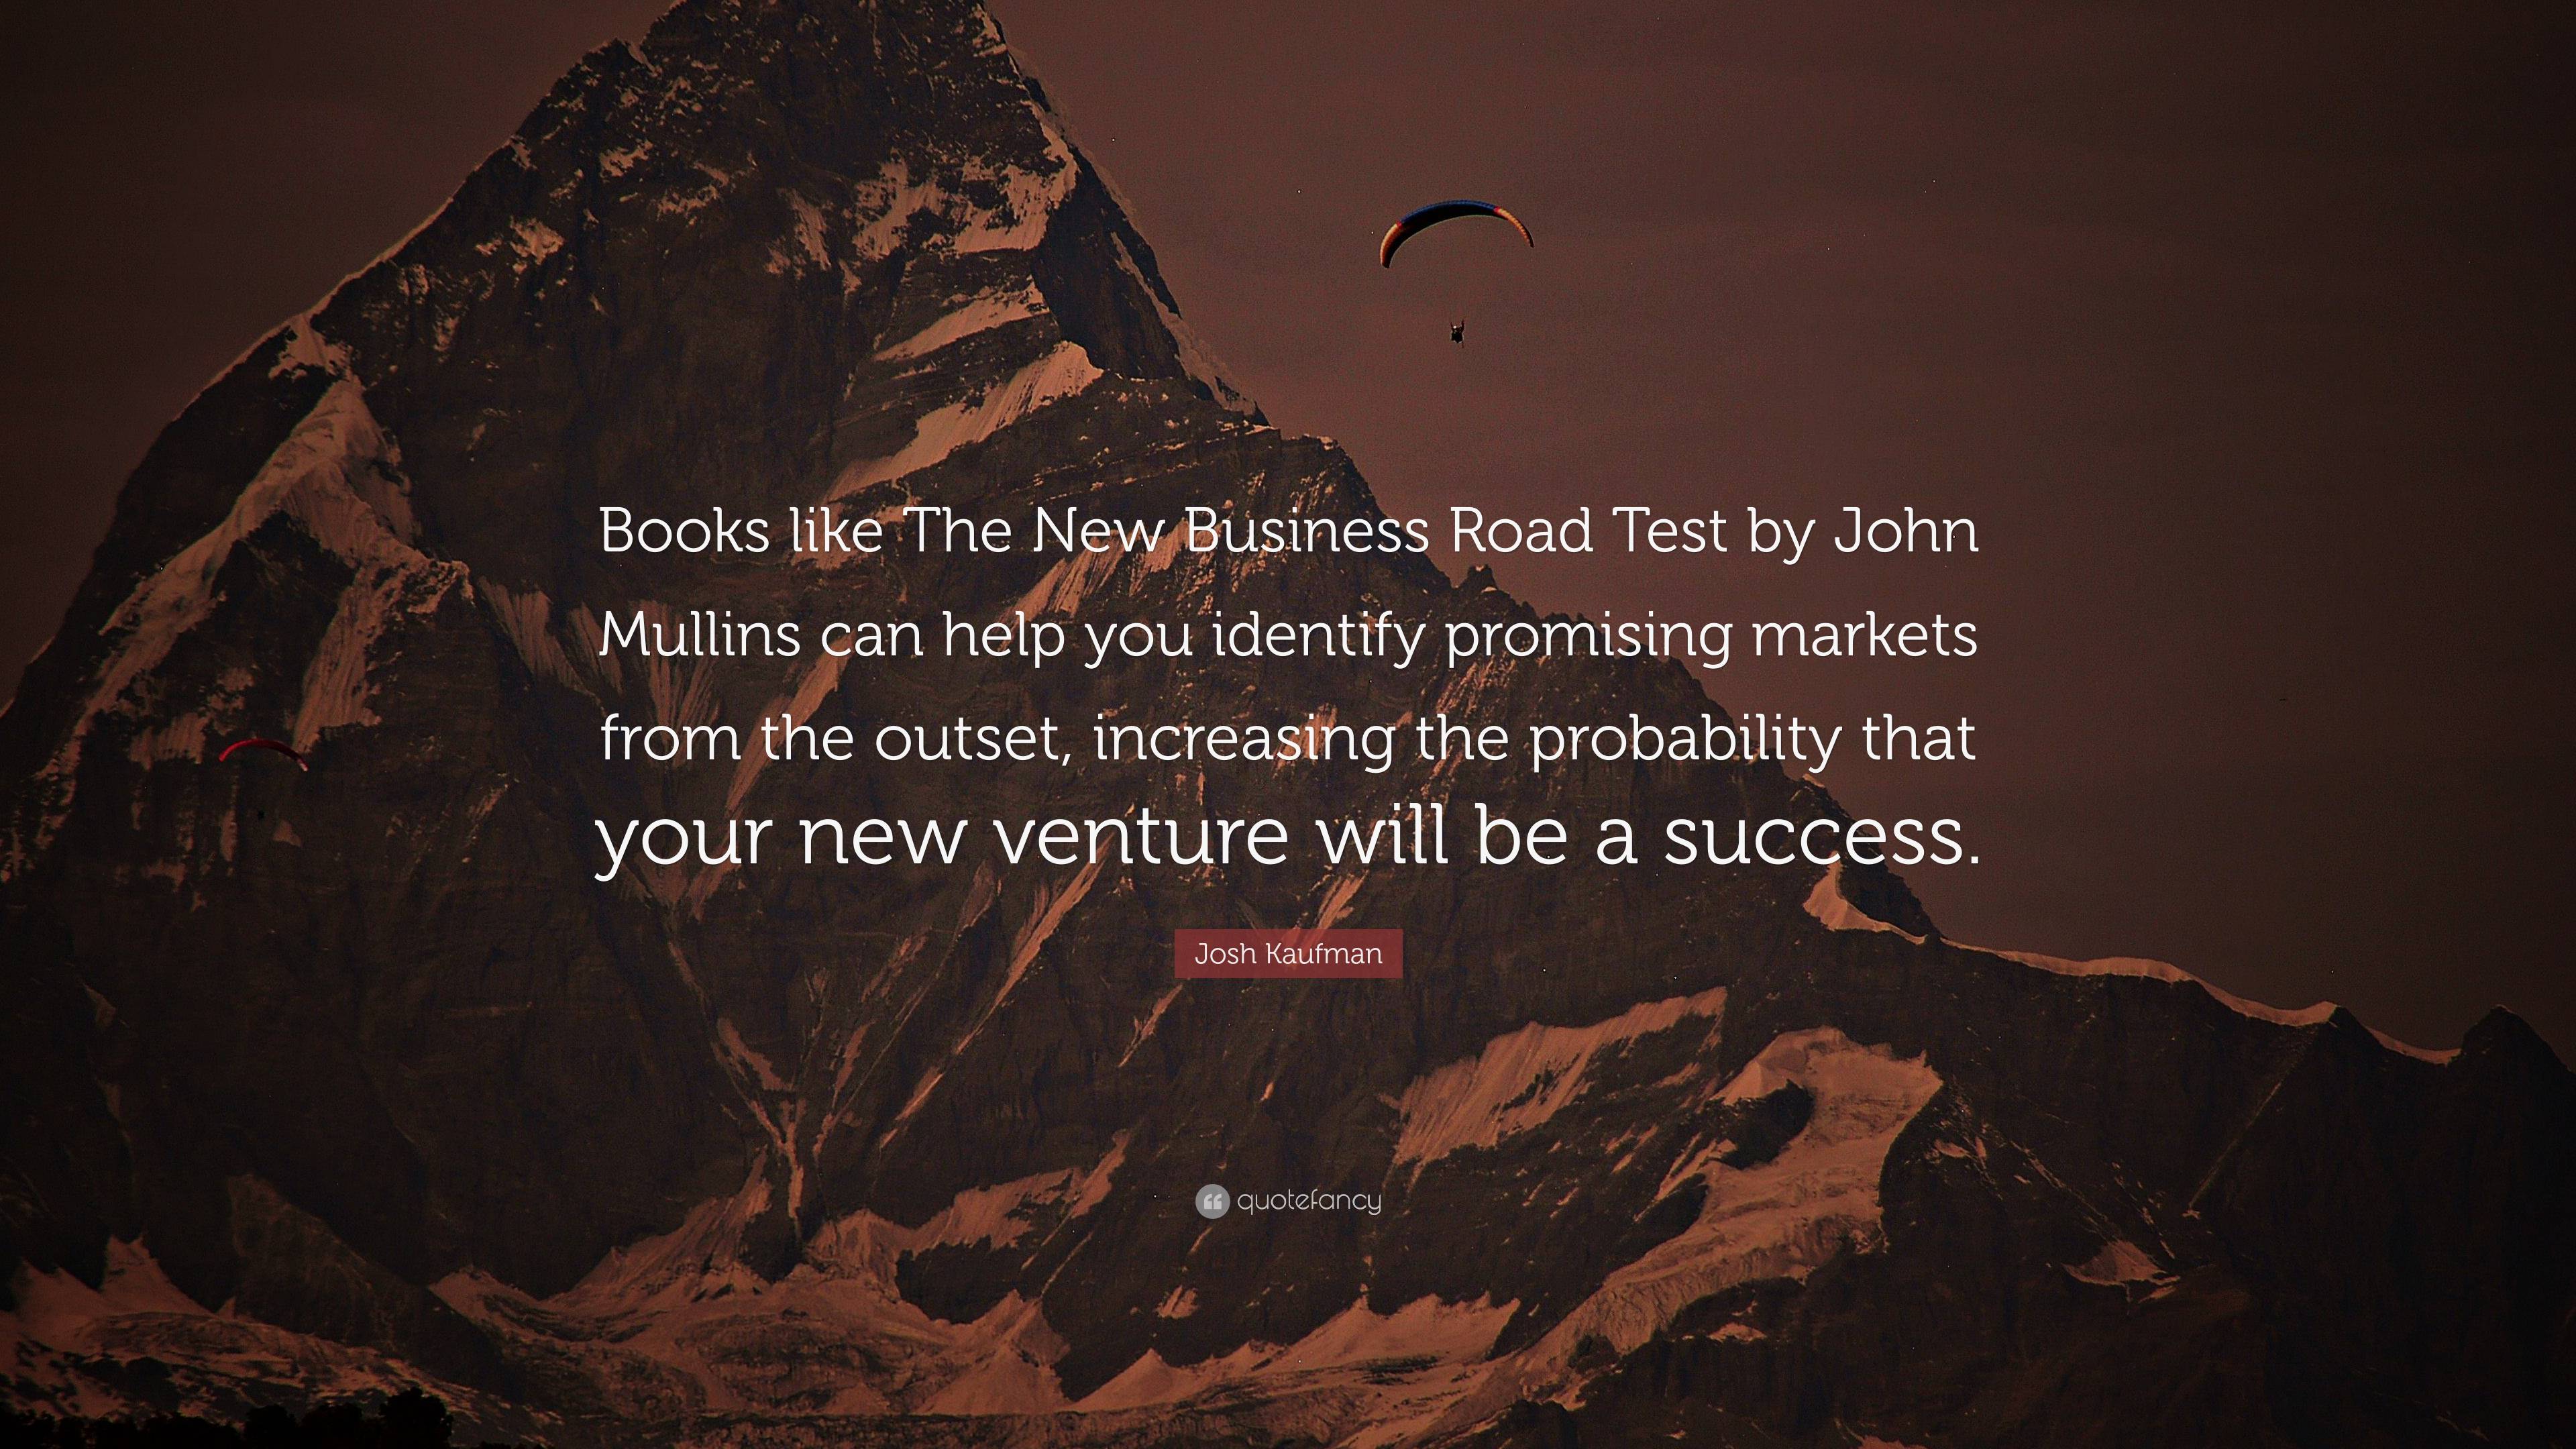 Josh Kaufman Quote: “Books like The New Business Road Test by John